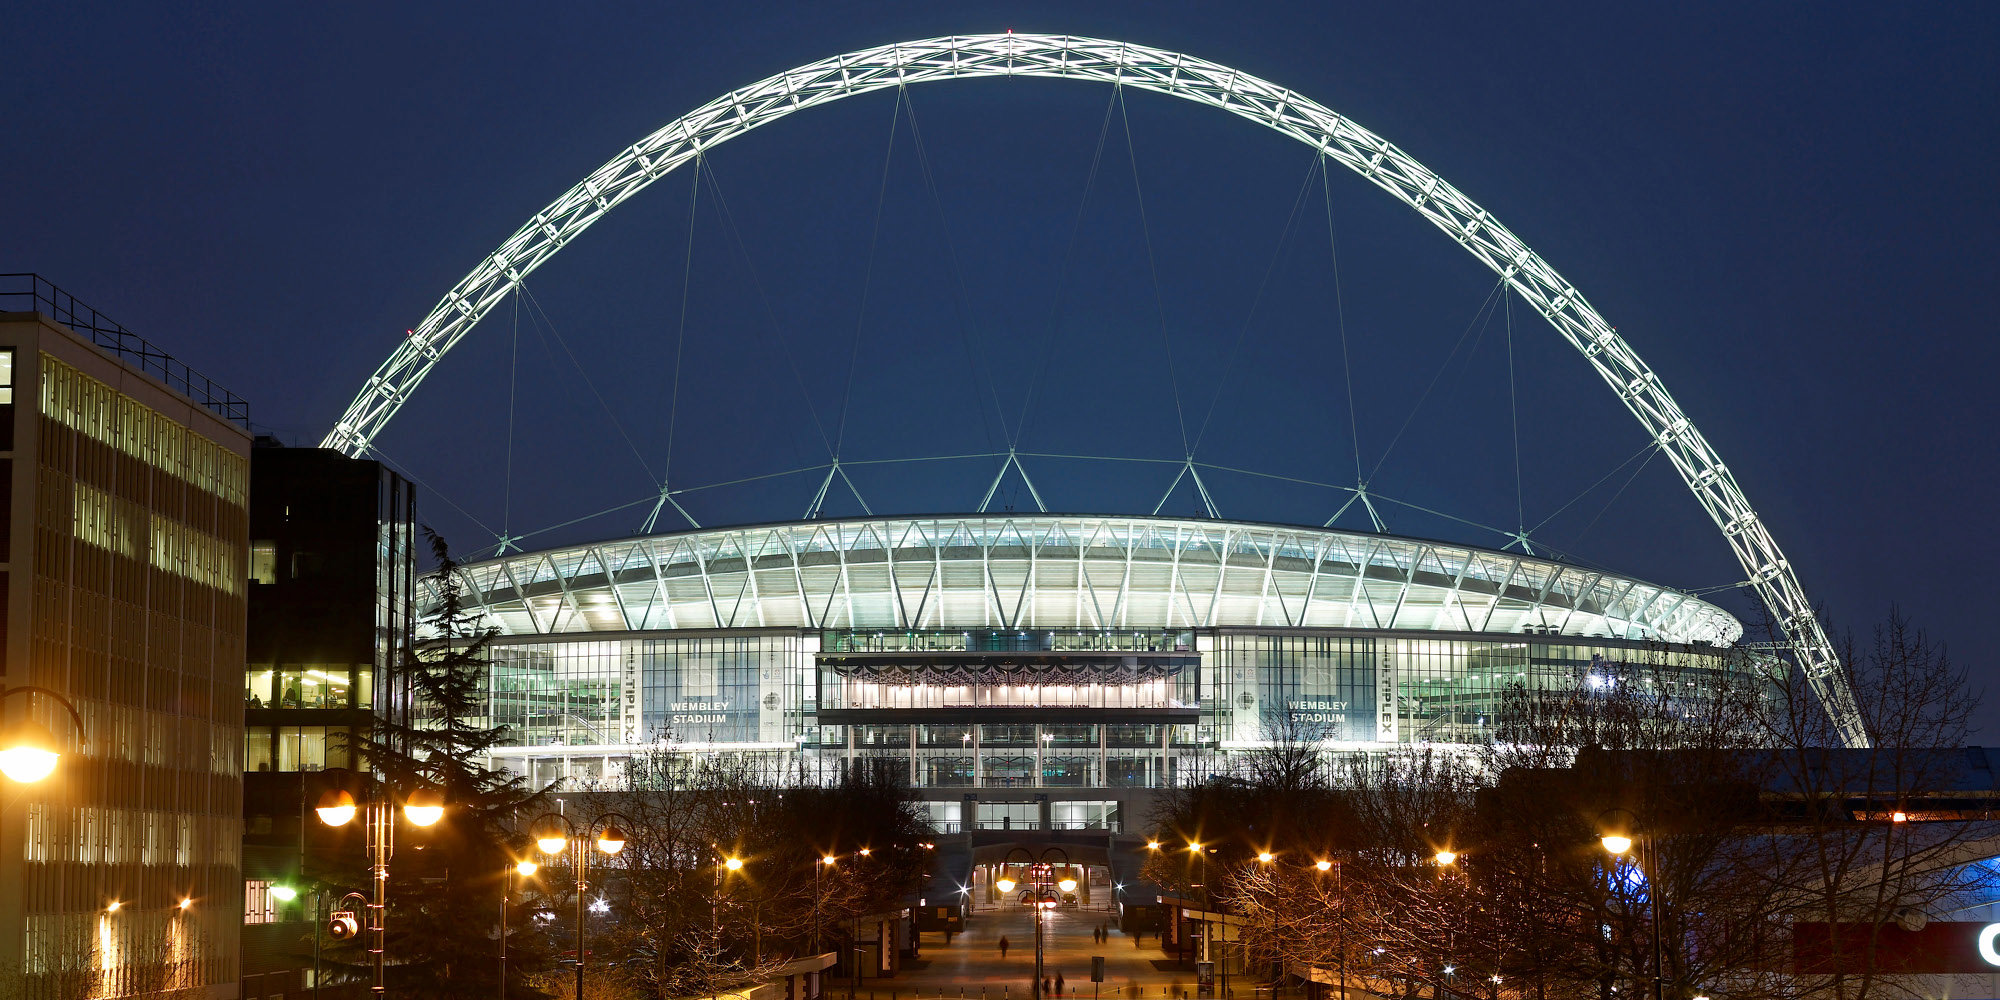 The arch is a symbol of Wembley Stadium and an instantly recognisable London landmark. 
© Nigel Young / Foster + Partners